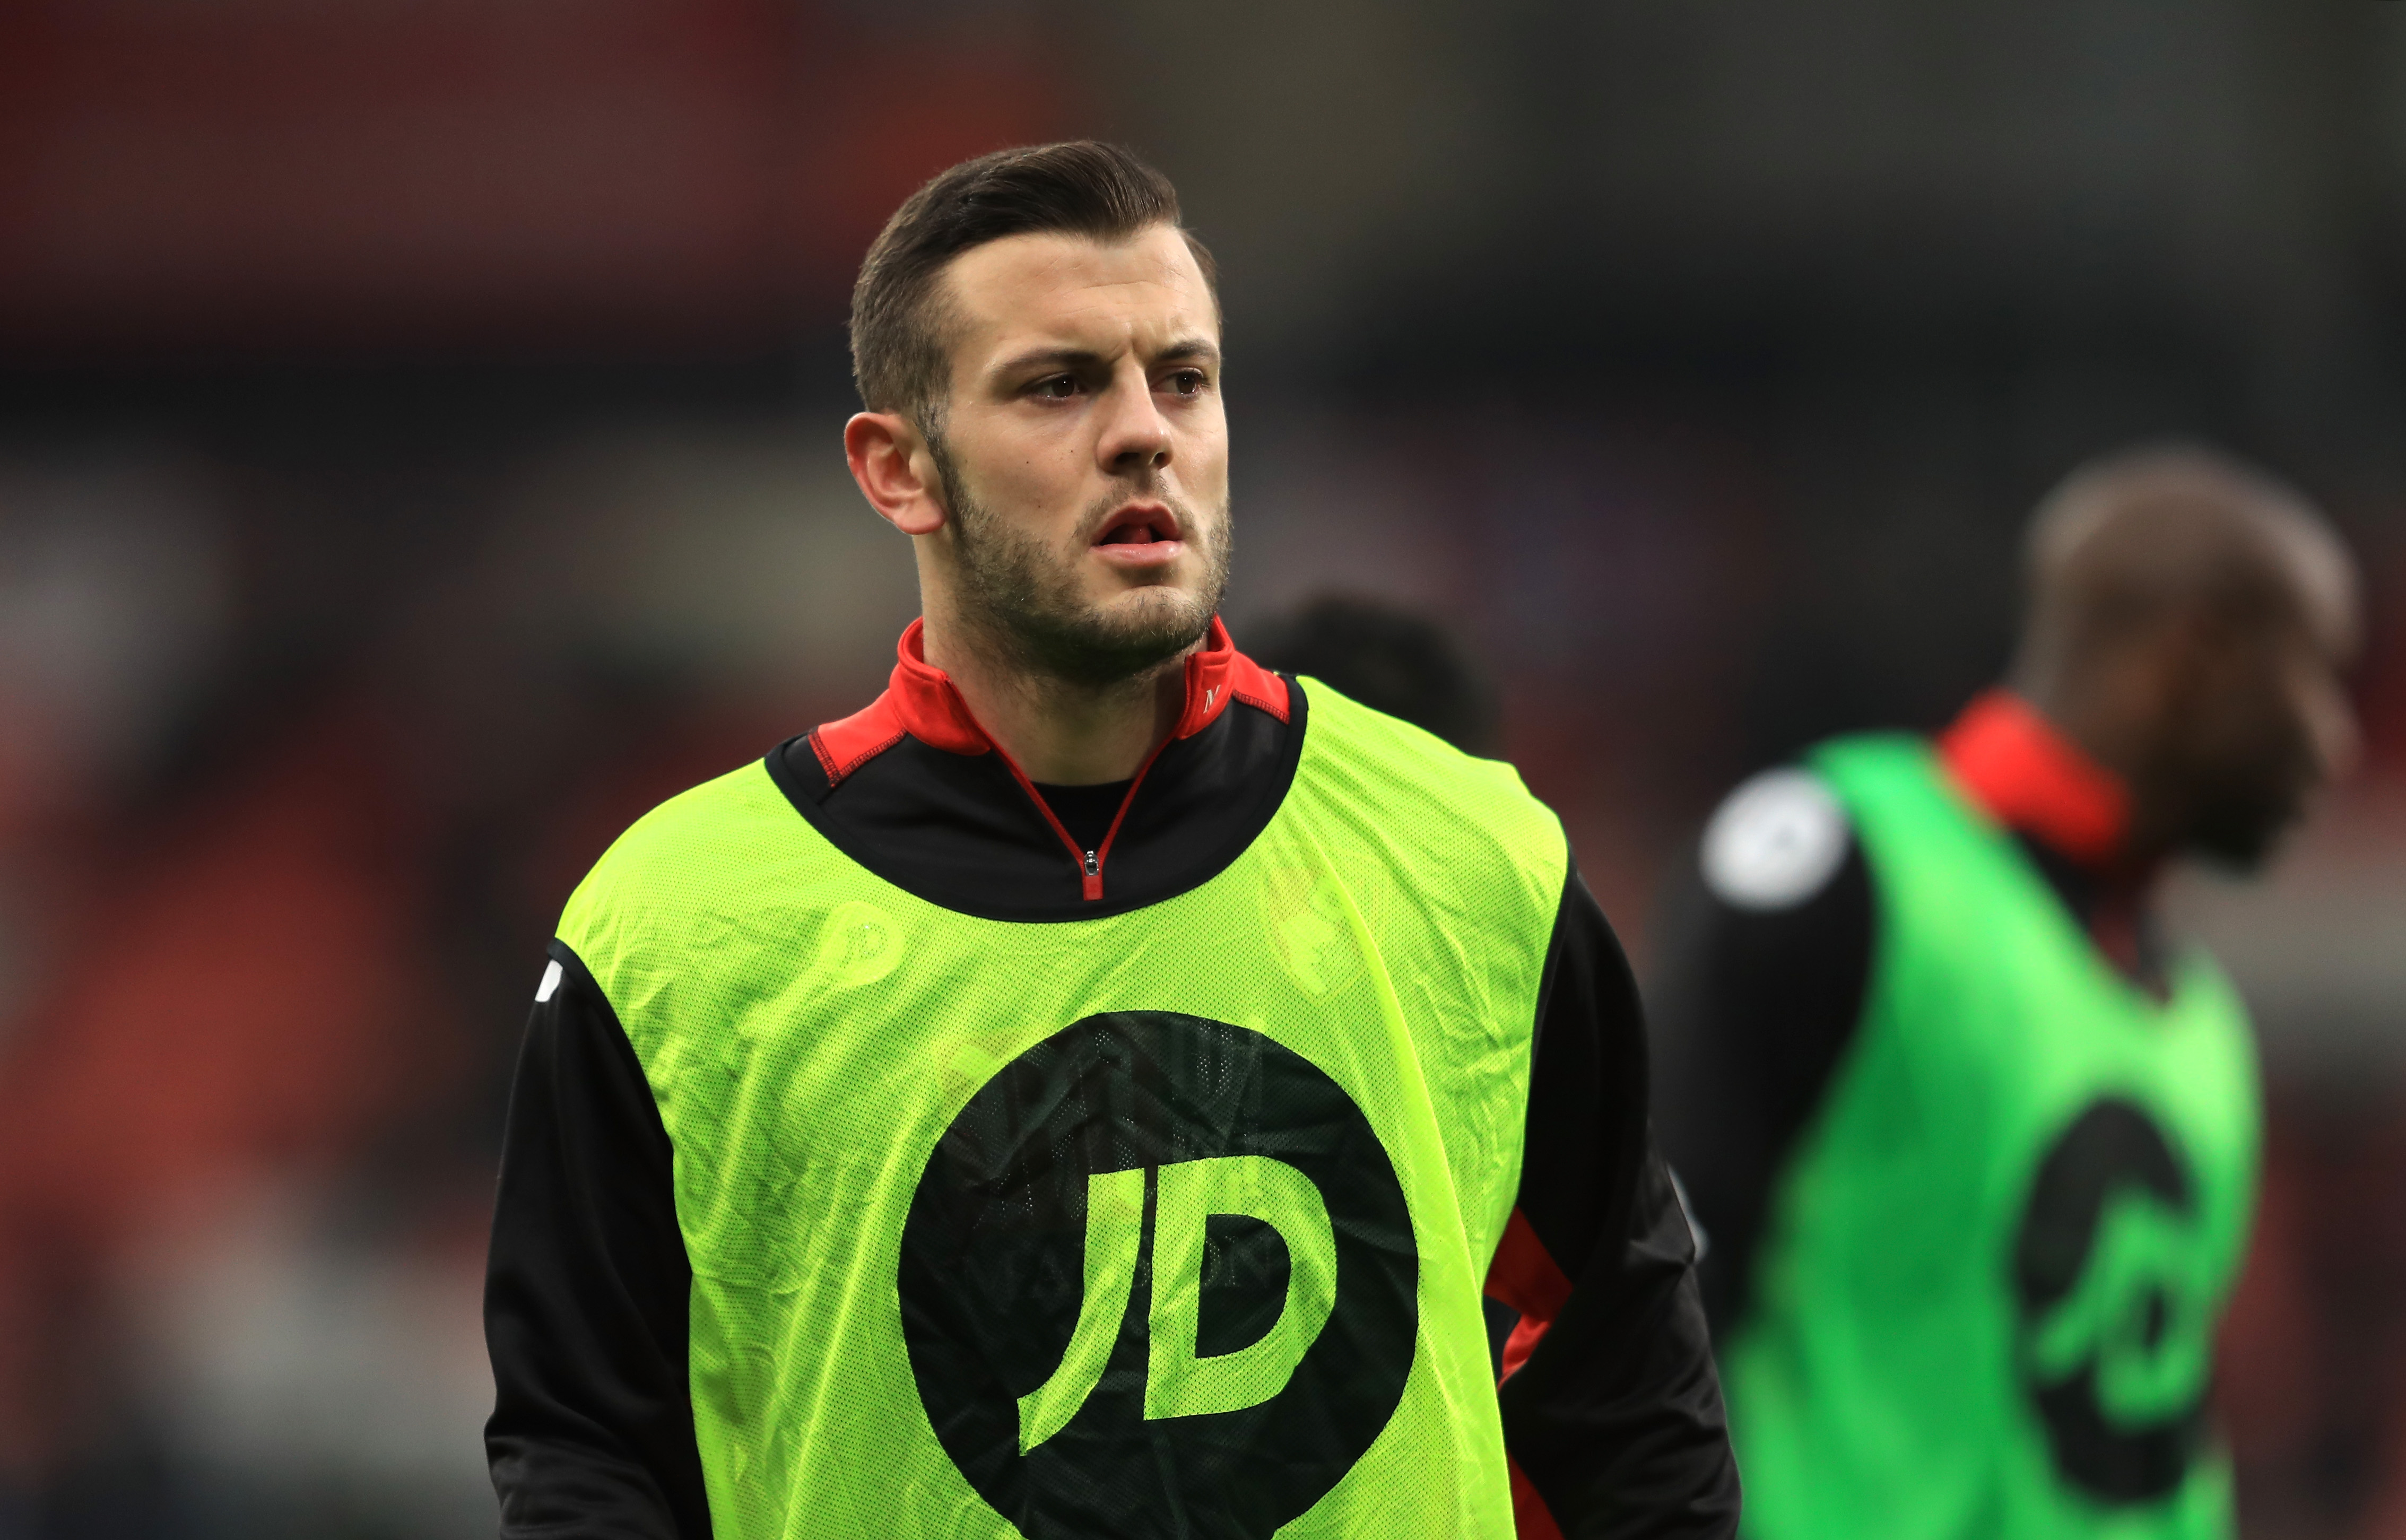 BOURNEMOUTH, ENGLAND - JANUARY 21:  Jack Wilshere of AFC Bournemouth (C) warms up prior to the Premier League match between AFC Bournemouth and Watford at Vitality Stadium on January 21, 2017 in Bournemouth, England.  (Photo by Richard Heathcote/Getty Images)